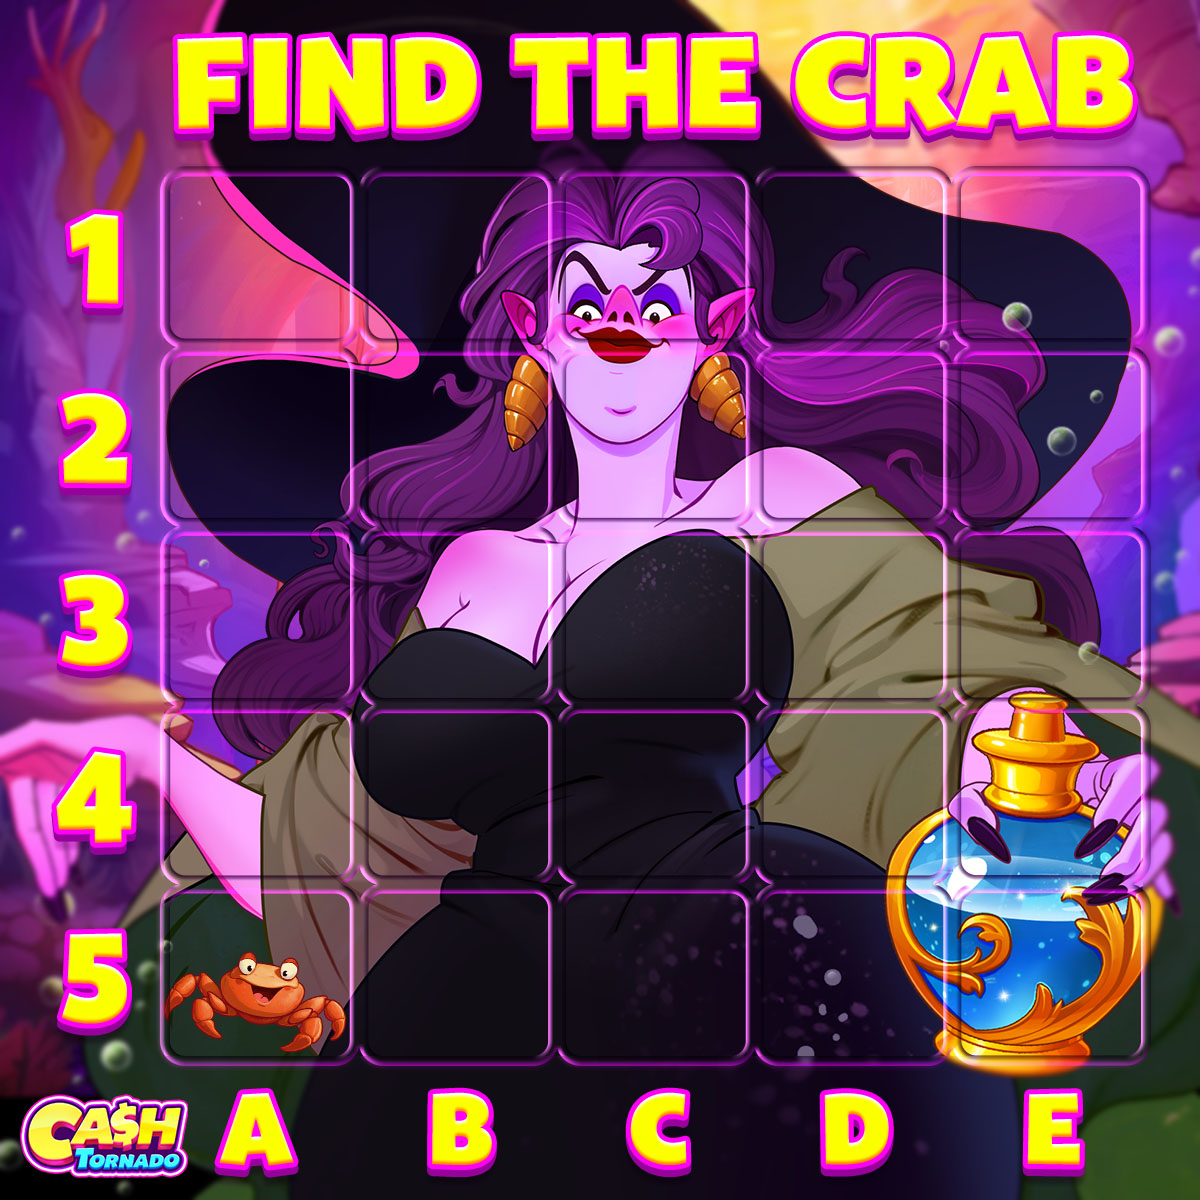 #FREECOIN:zeroo.games/yckpwt27
🌴 Where's the crab shakin' it? 🦀 Tell us your answer!